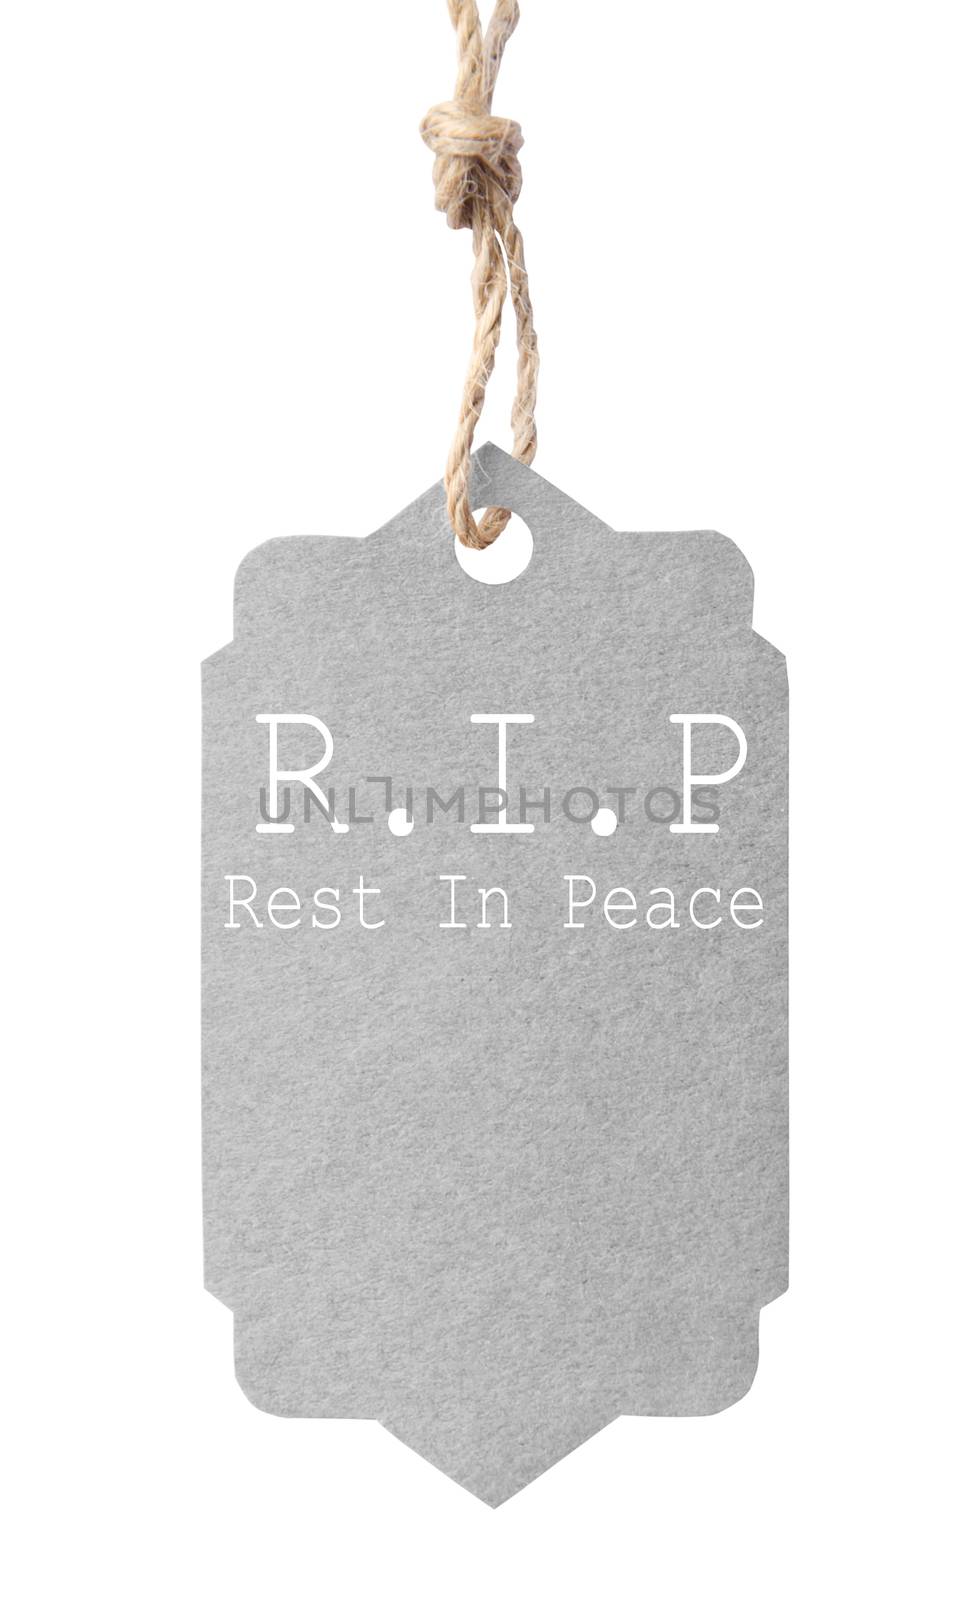 Eco friendly label. R.I.P rest in peace, isolated on white backg by Gamjai